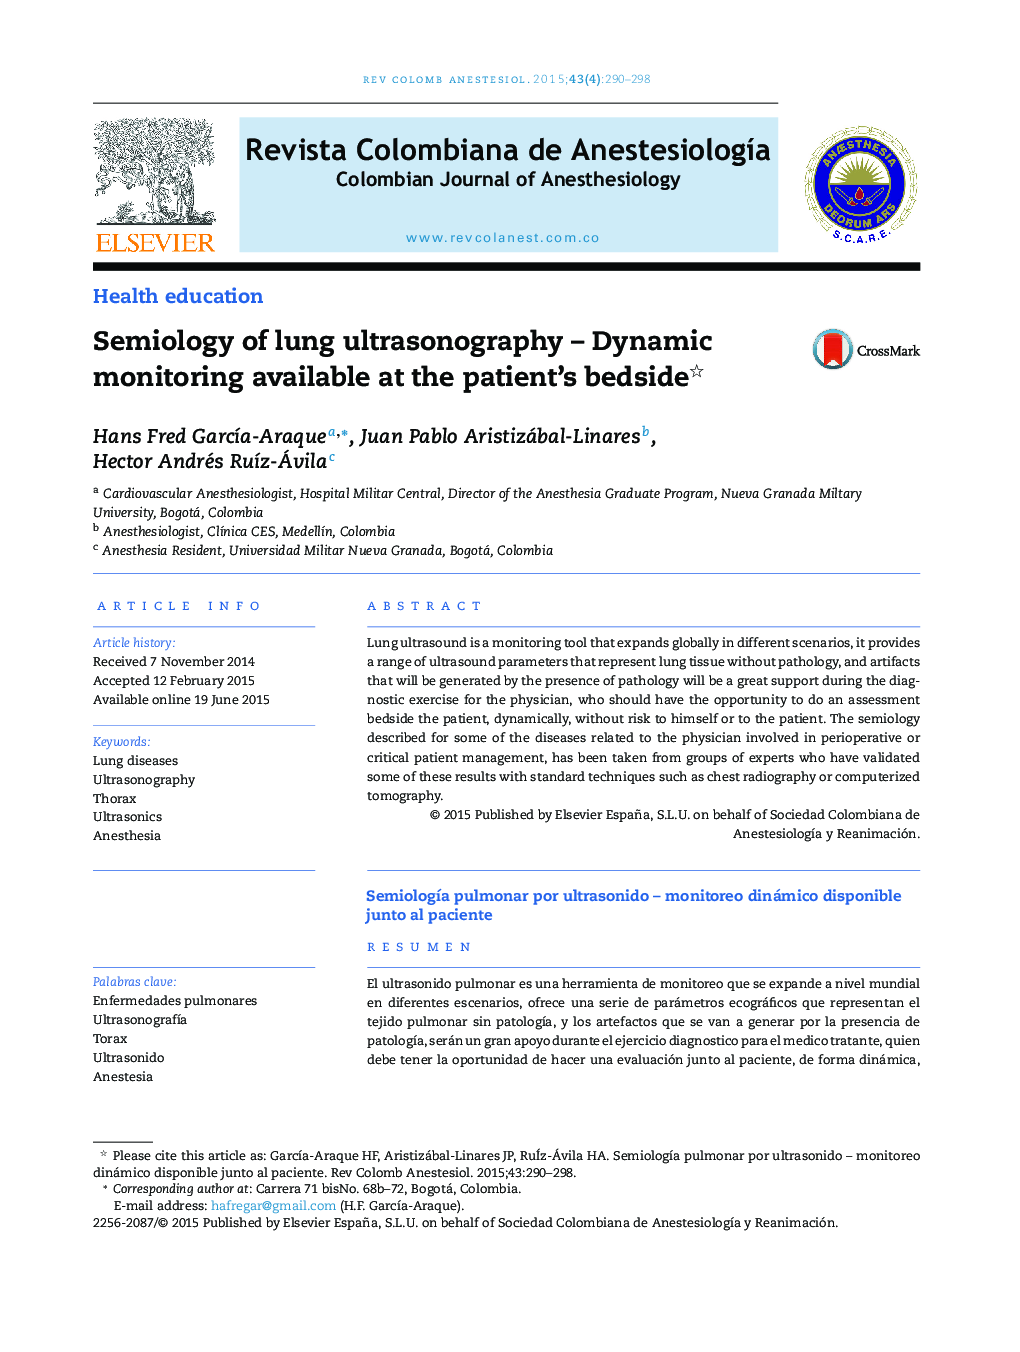 Semiology of lung ultrasonography – Dynamic monitoring available at the patient's bedside 